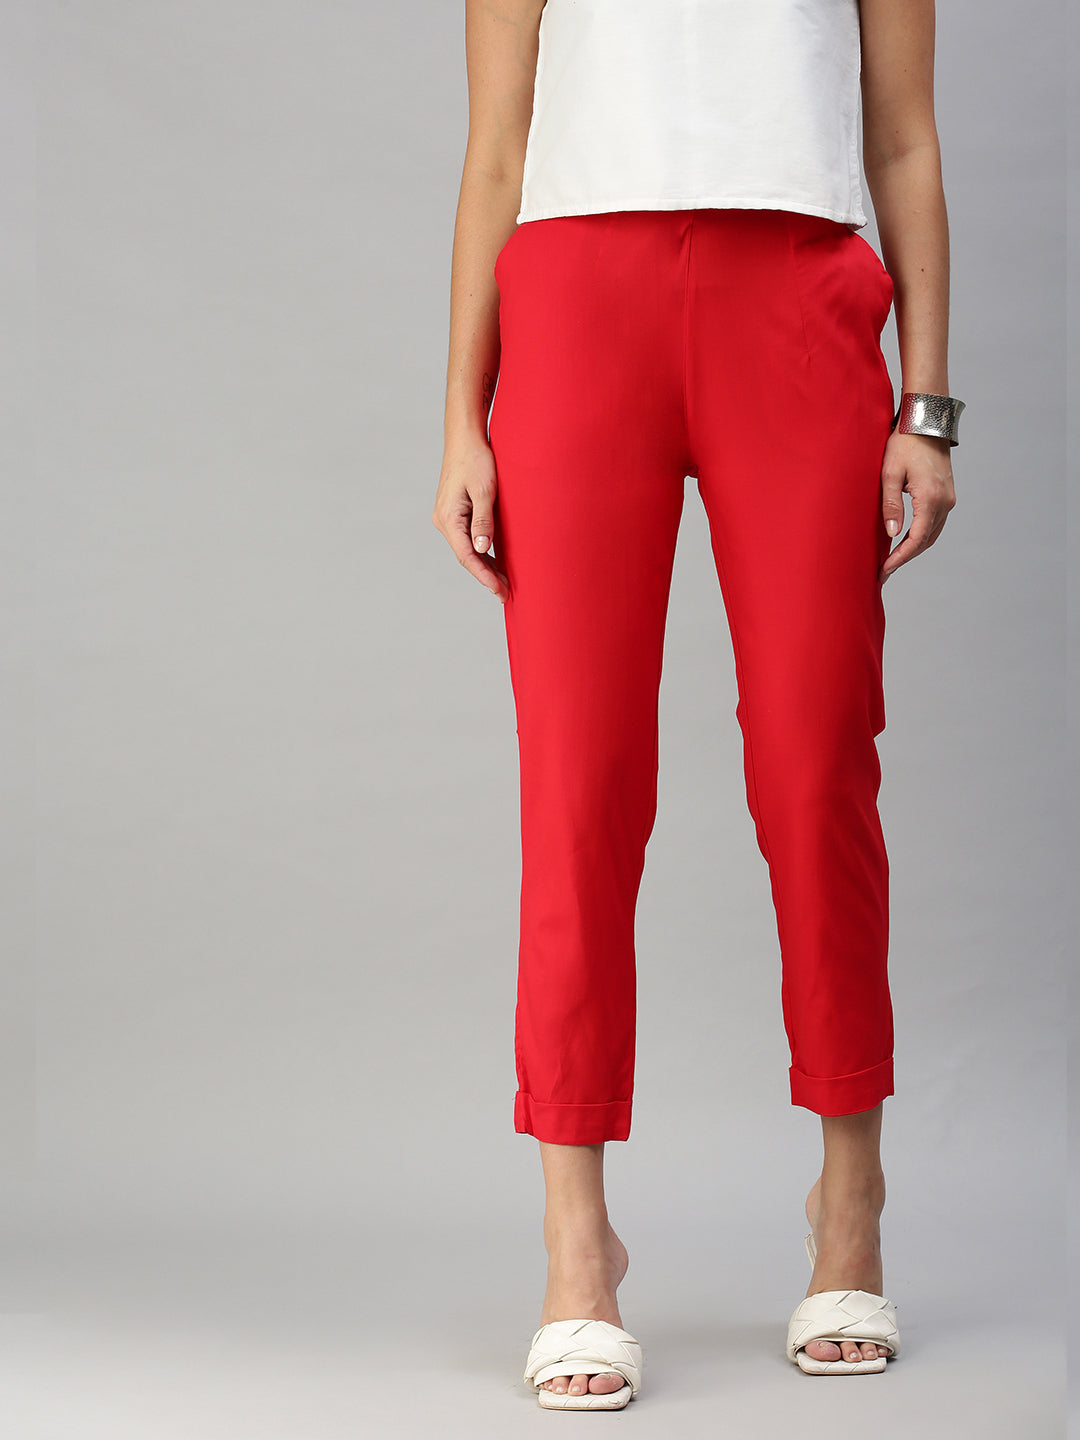 Combo: Black & Classic Red Cigarette Pants- Set of 2 – Thevasa